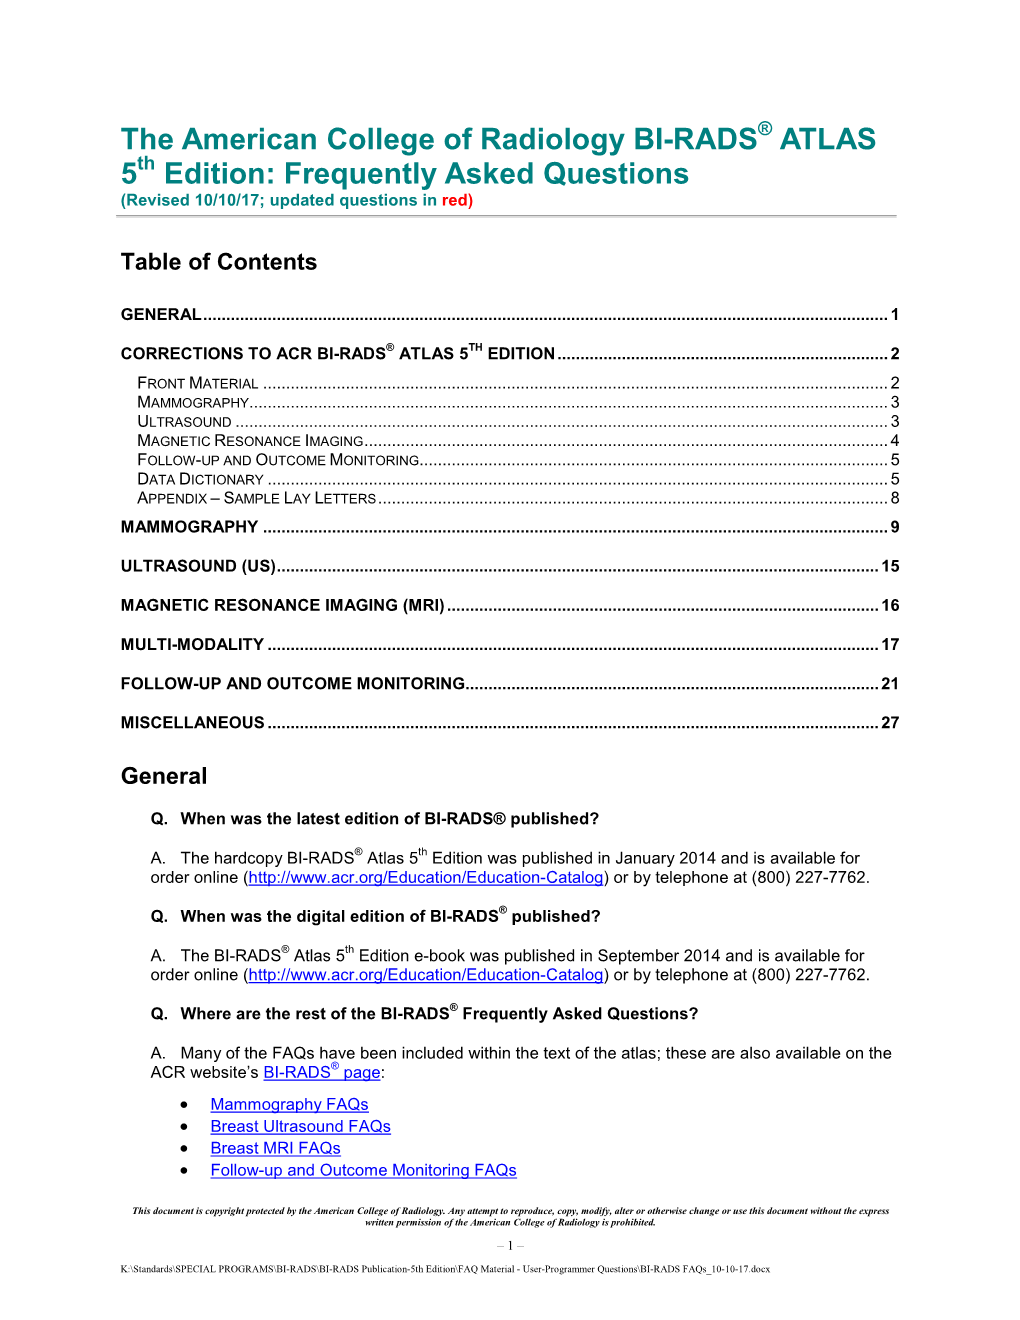 ACR BI-RADS Frequently Asked Questions and Corrections